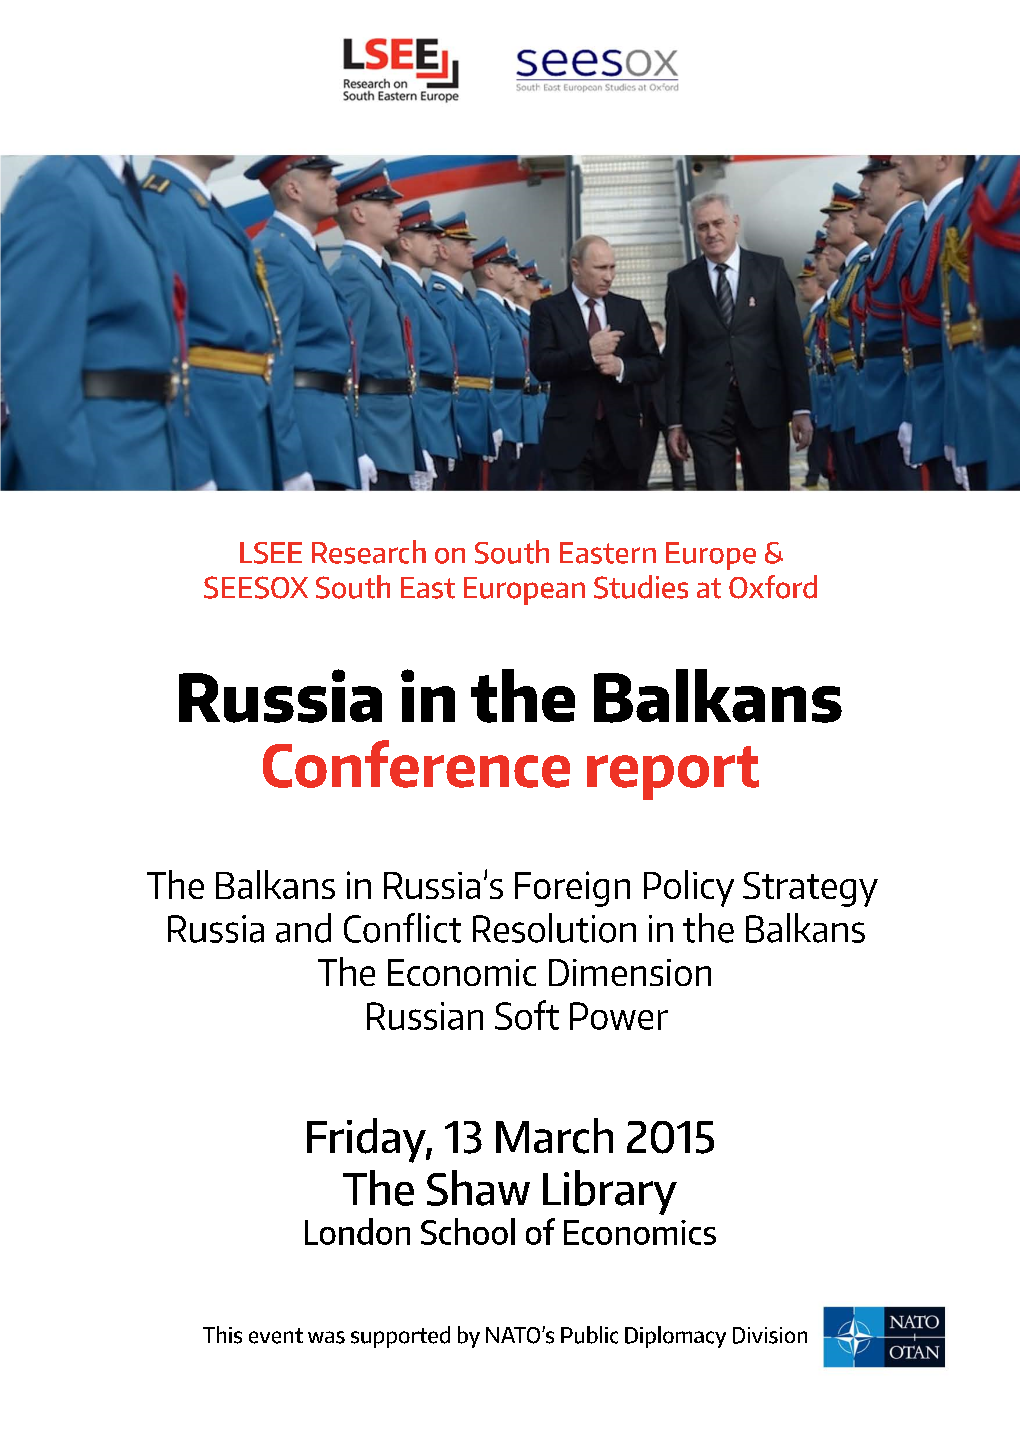 Russia in the Balkans Conference Report